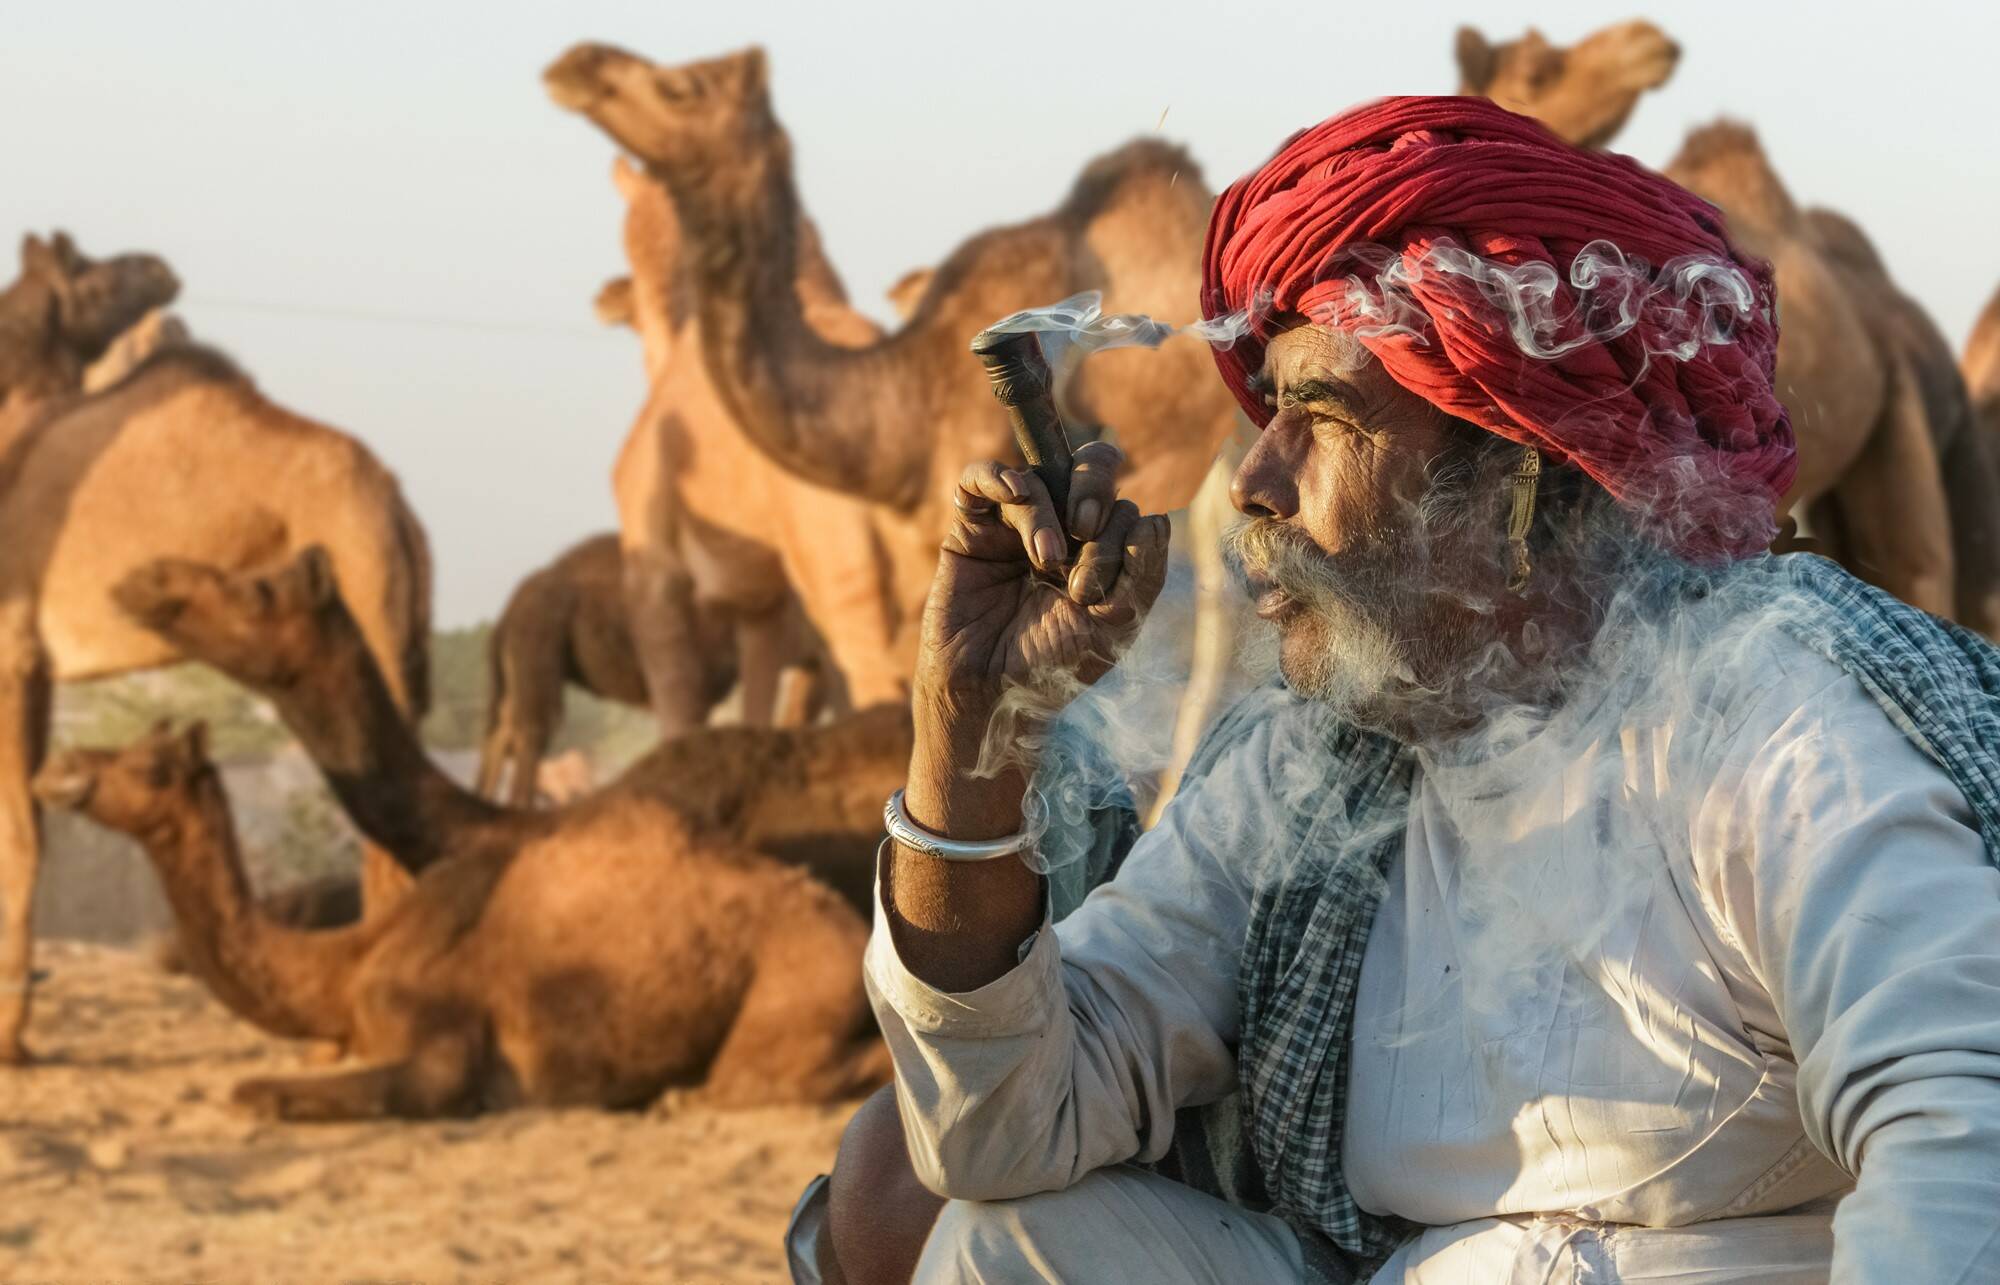 A camel trader at the Pushkar camel market in India. (Photo by Mike Holtby)